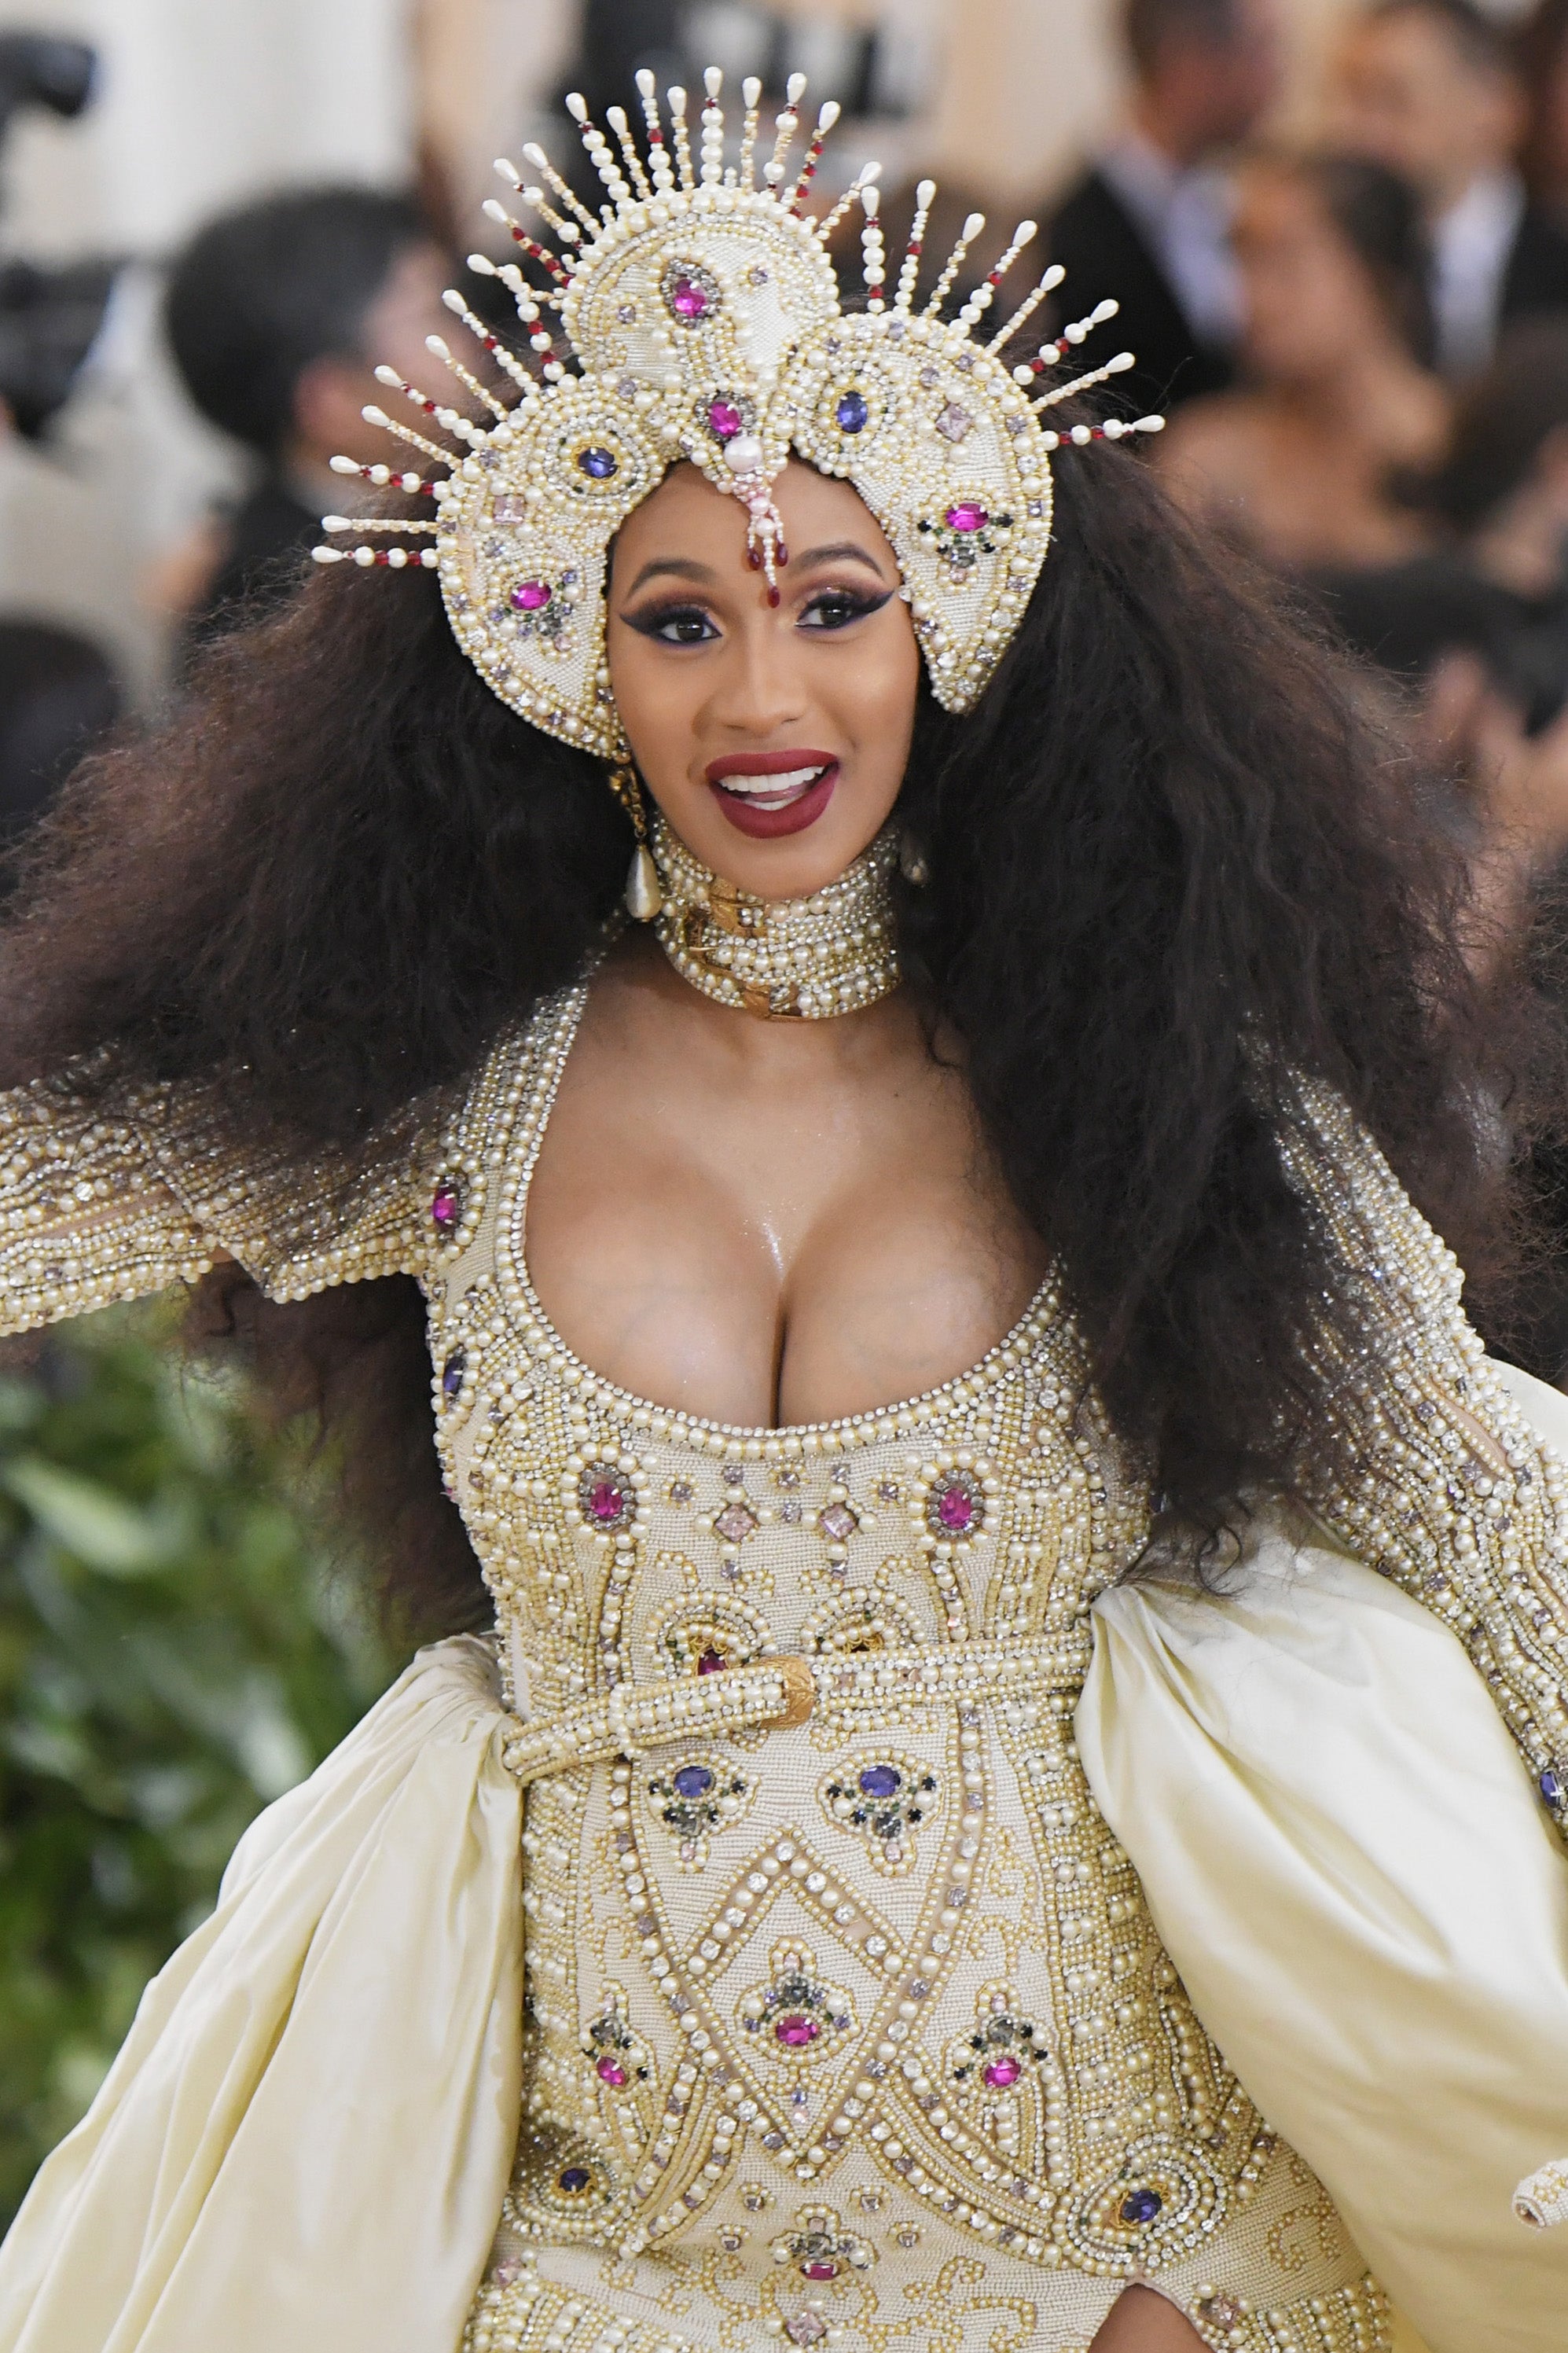 Behold, The Most Alluring Beauty Moments At The Met Gala 2018
